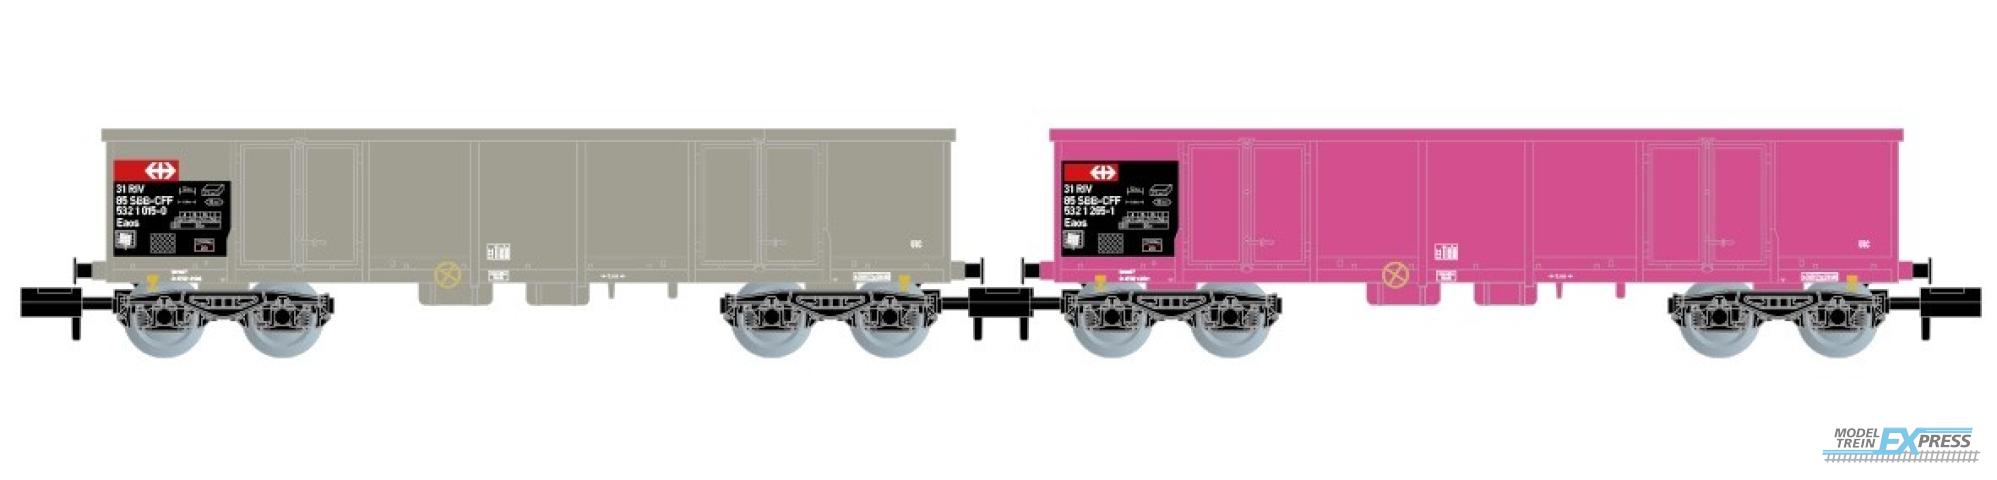 Arnold 6426 SBB, 2-unit pack Eaos, grey and pink livery, loaded with scrap, ep. V